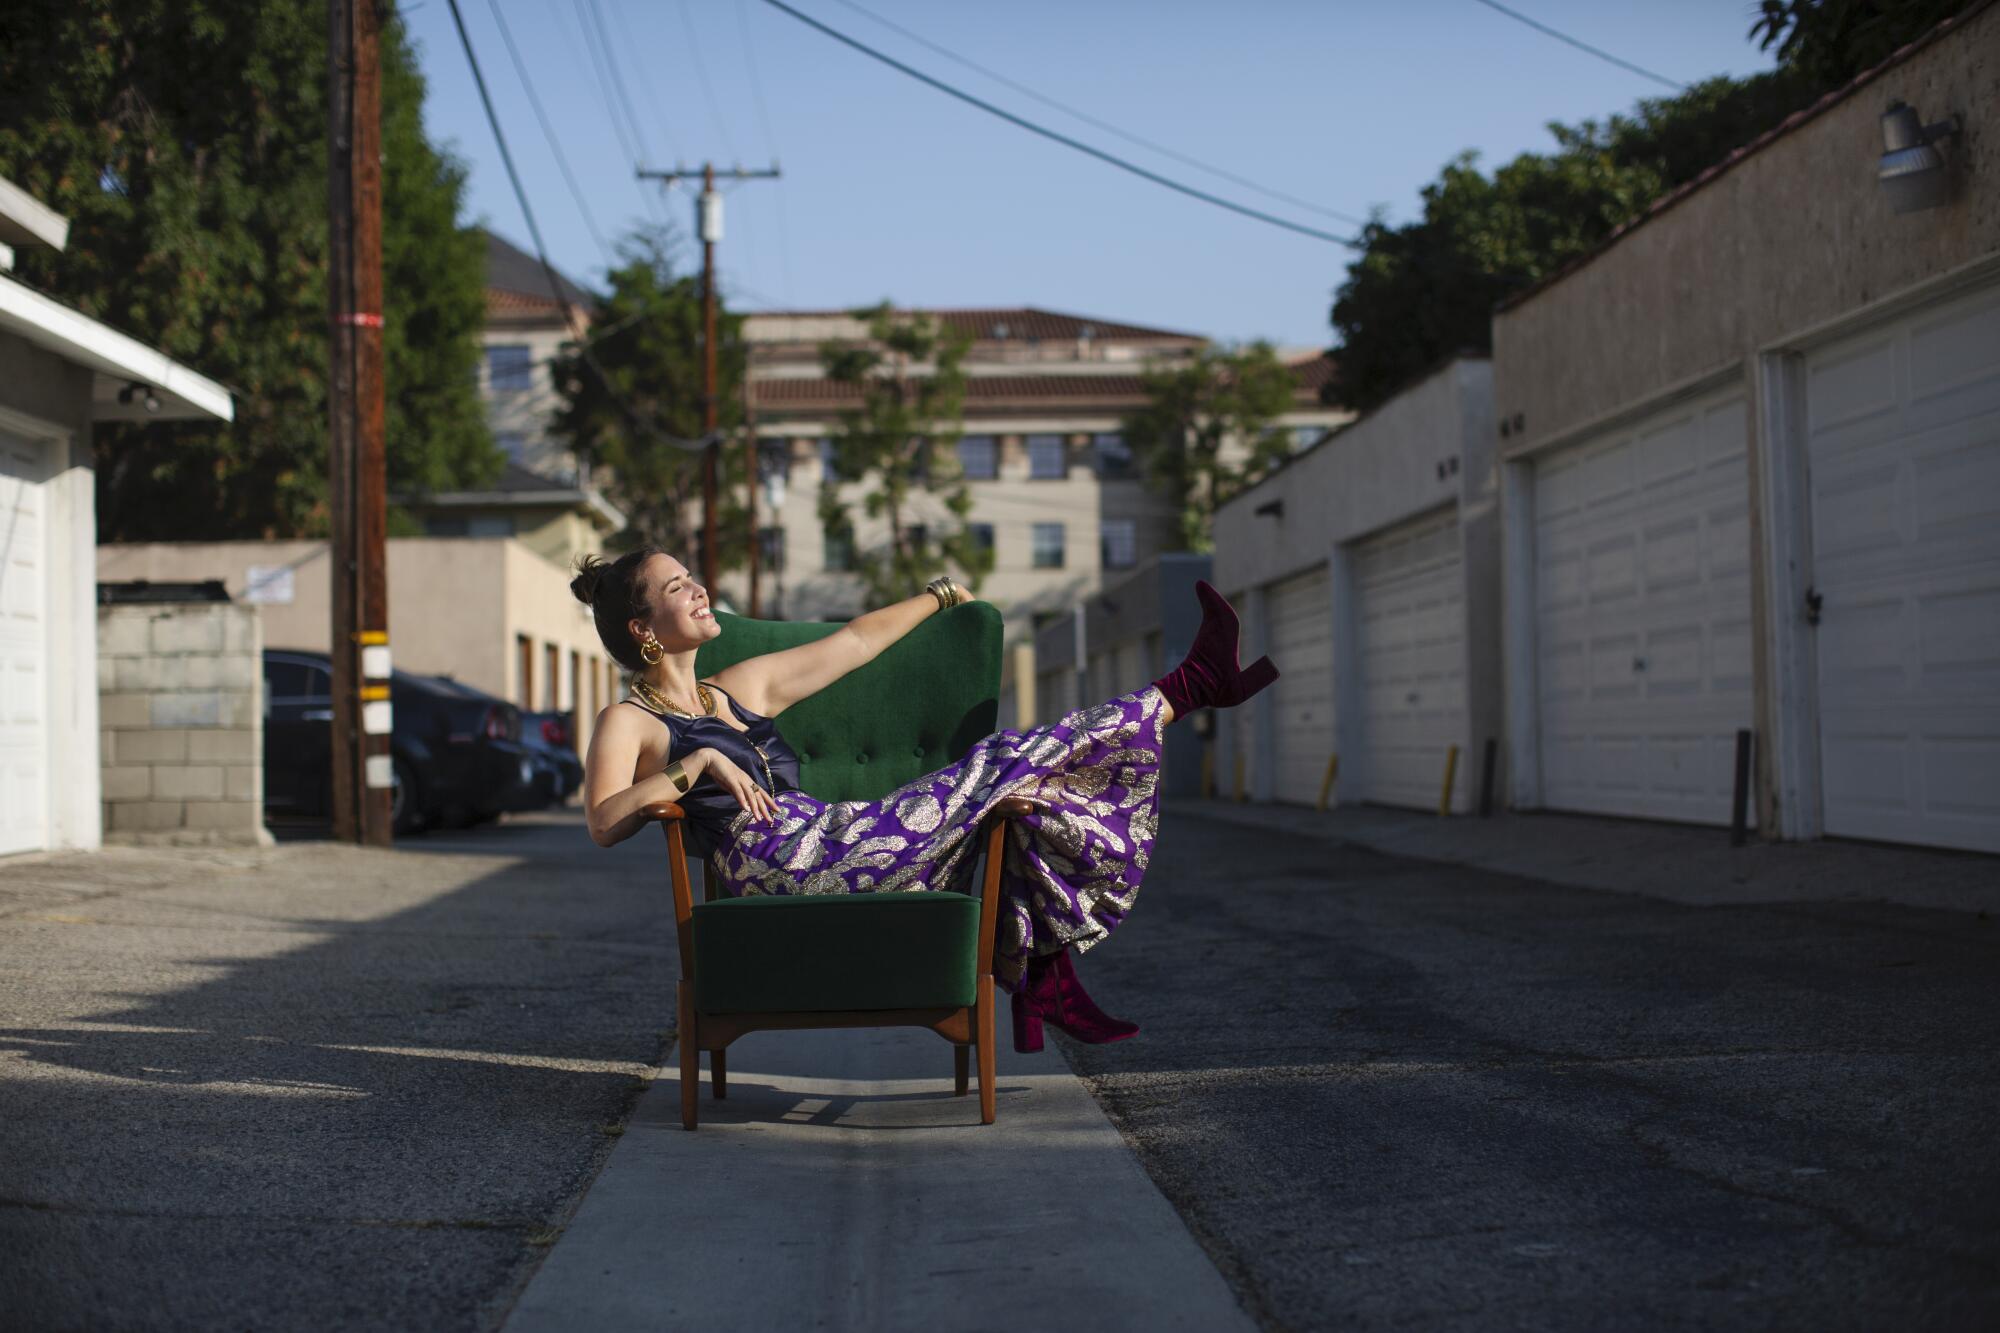 Analise McNeill poses in an alley on a green chair.